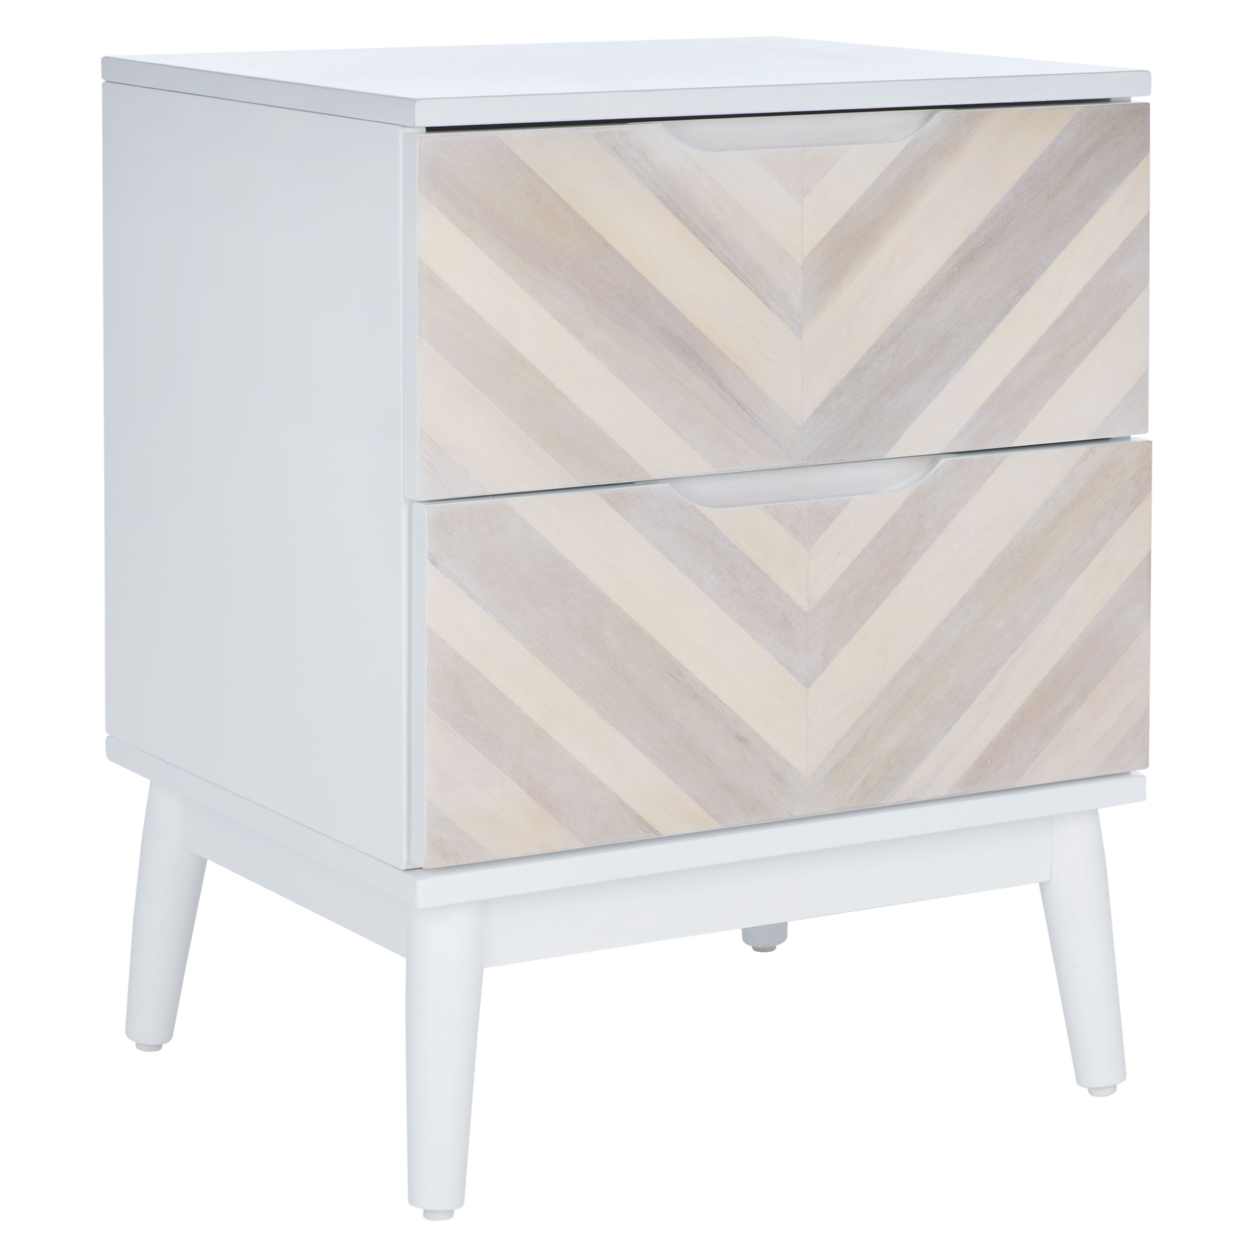 SAFAVIEH Tay 2-Drawer Patterned Night Stand White Washed